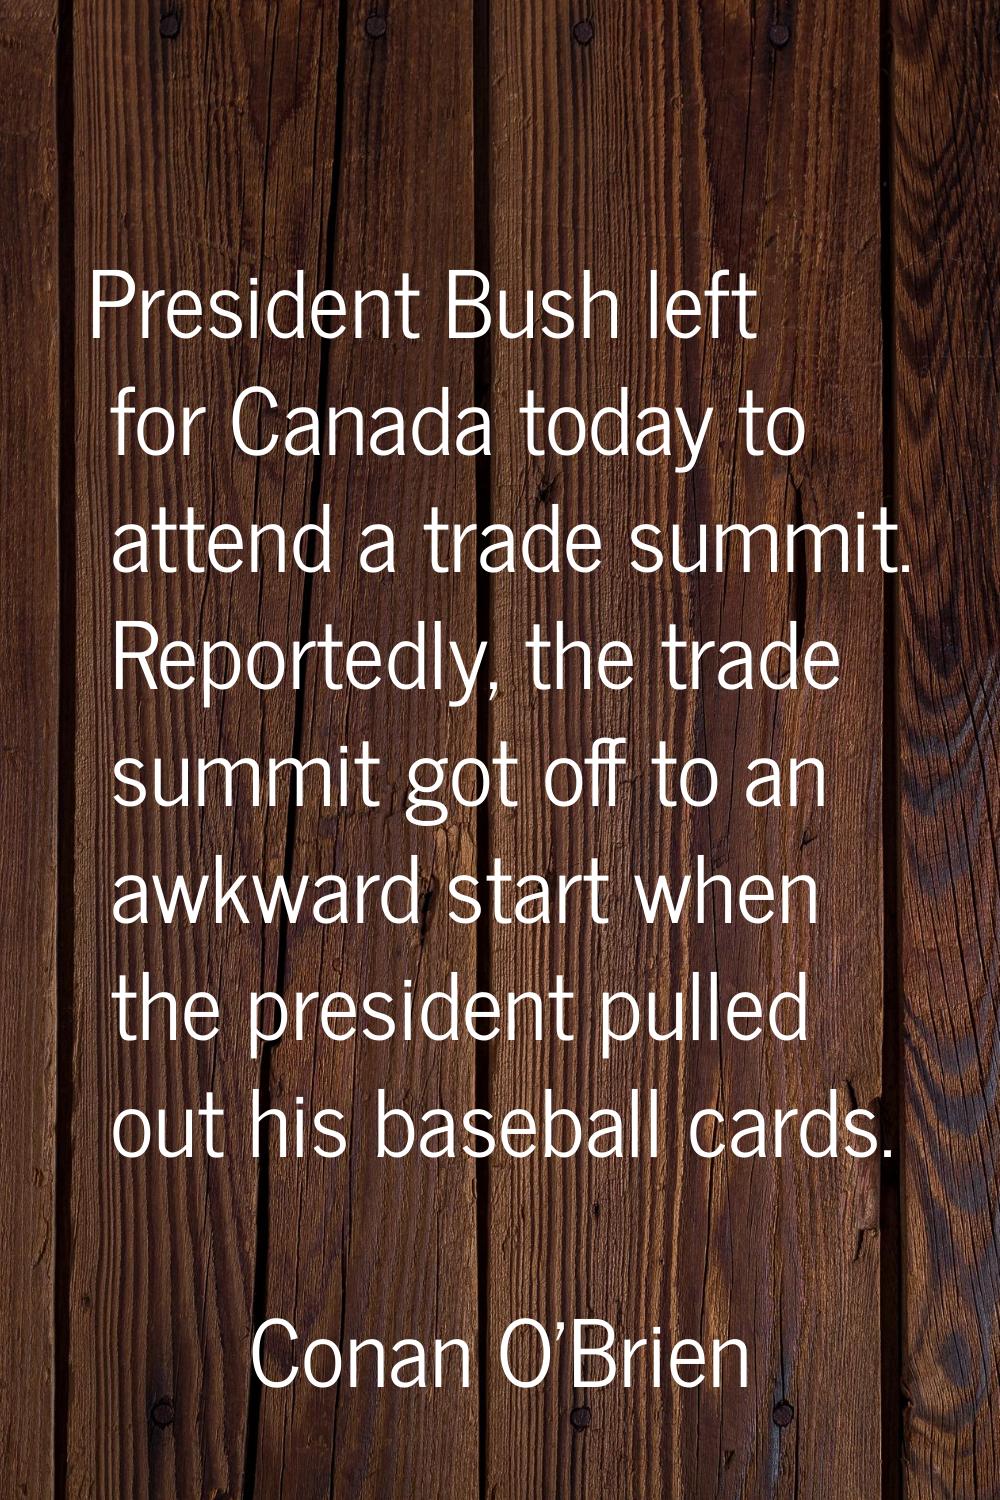 President Bush left for Canada today to attend a trade summit. Reportedly, the trade summit got off